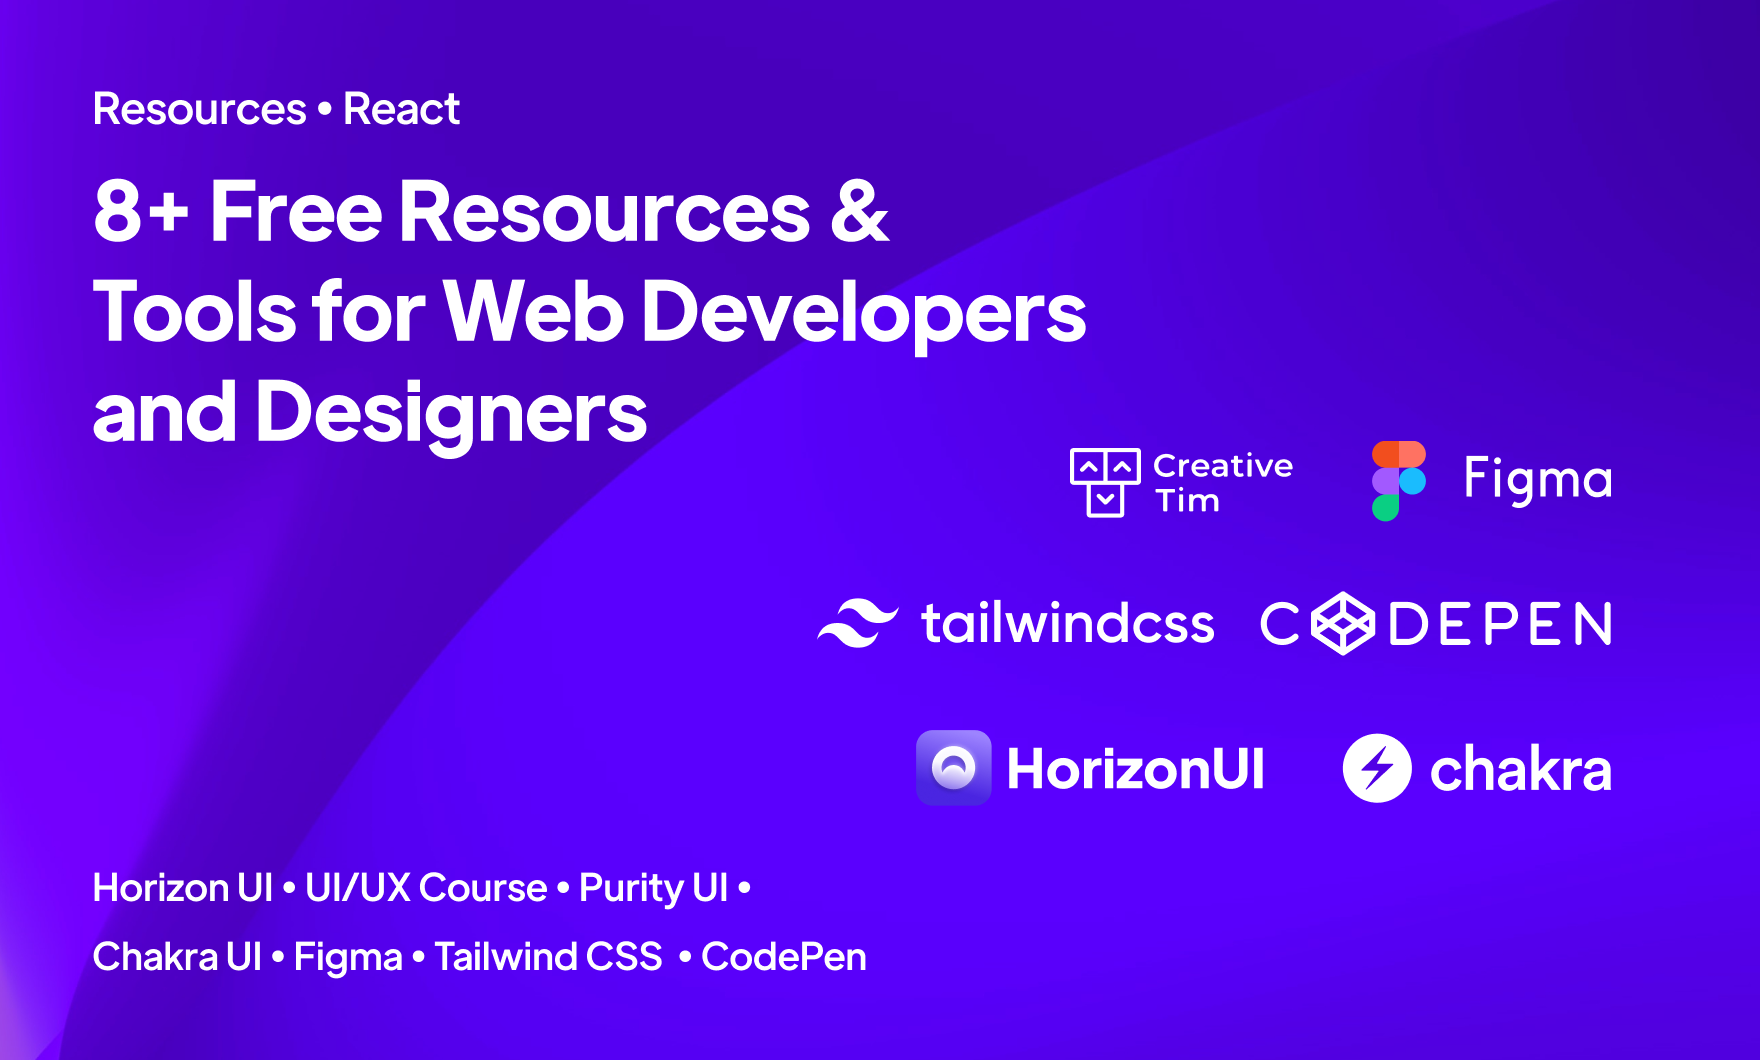 8+ Free Resources & Tools for Web Developers and Designers